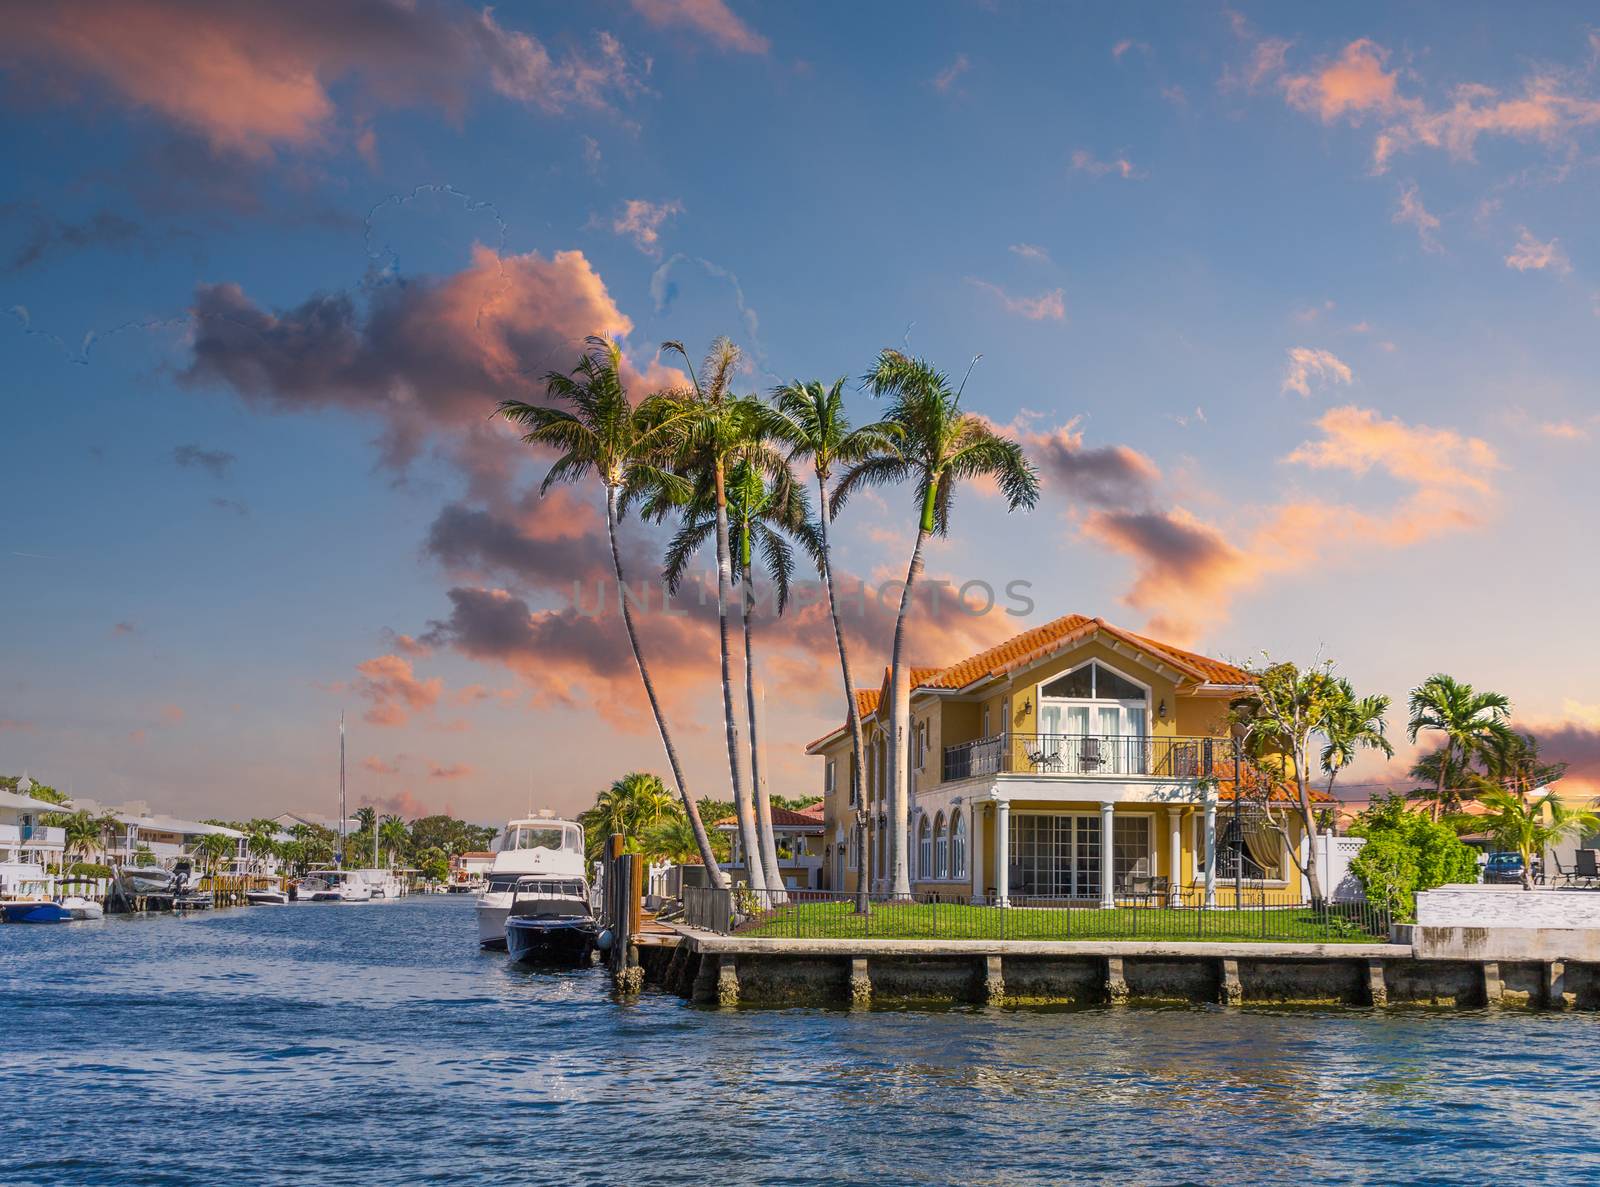 Waterfront Home with Palm Trees at Dusk by dbvirago